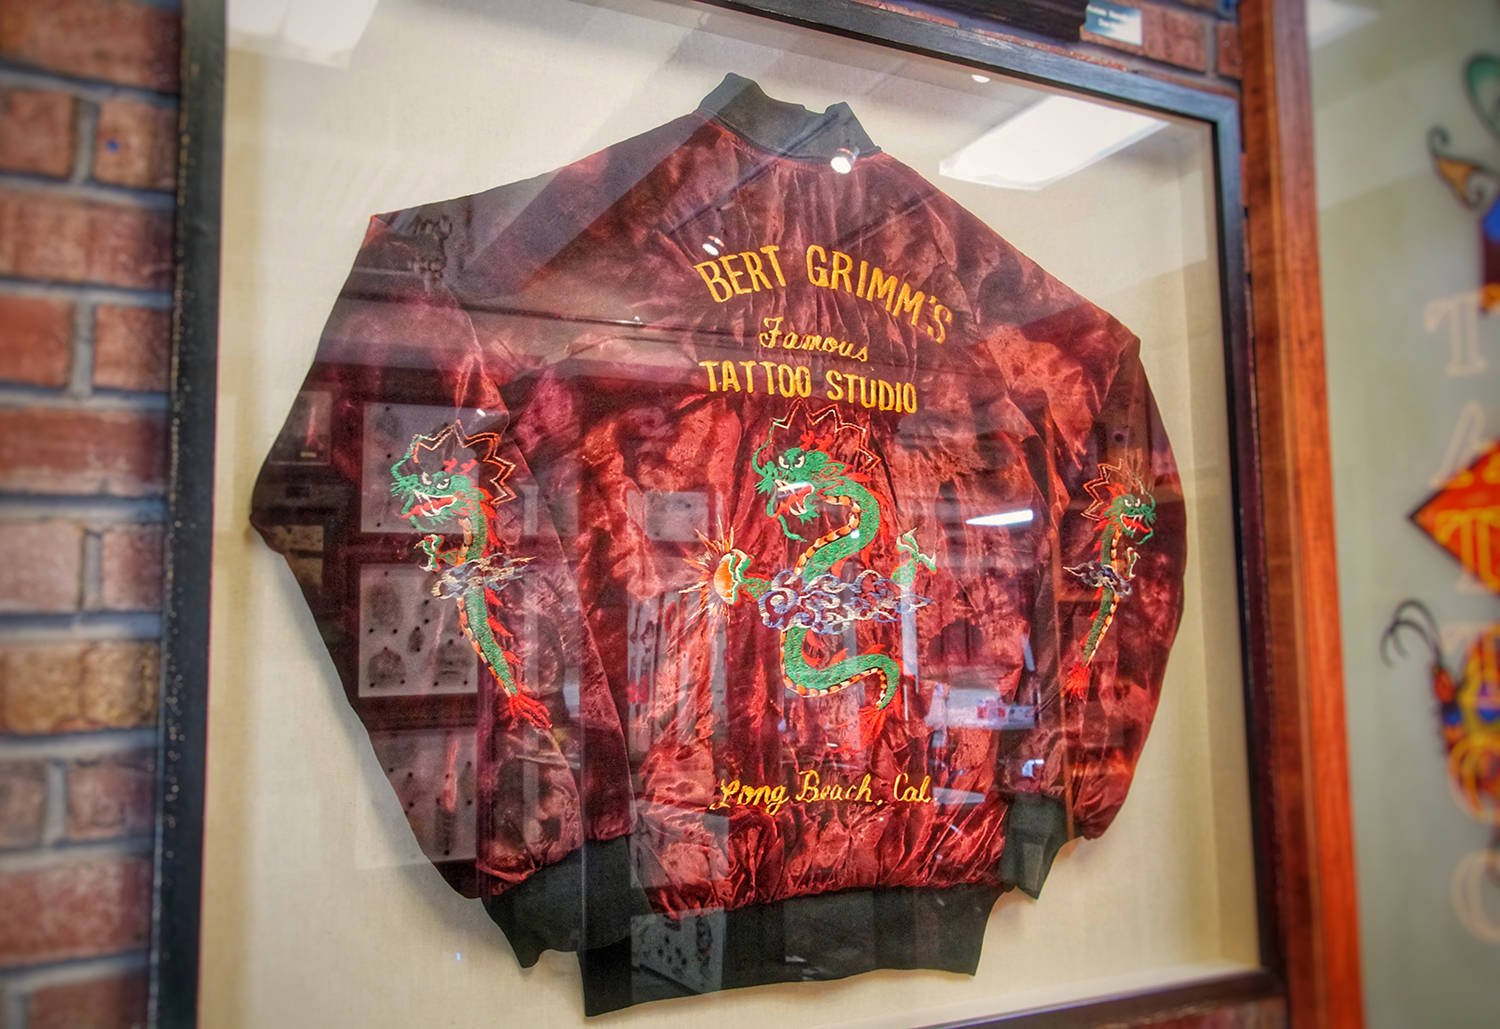 A rick walters jacket donated to outer limits. Embroidery of Bert grimms famous tattoo studio  - photo by the tattoo journalist